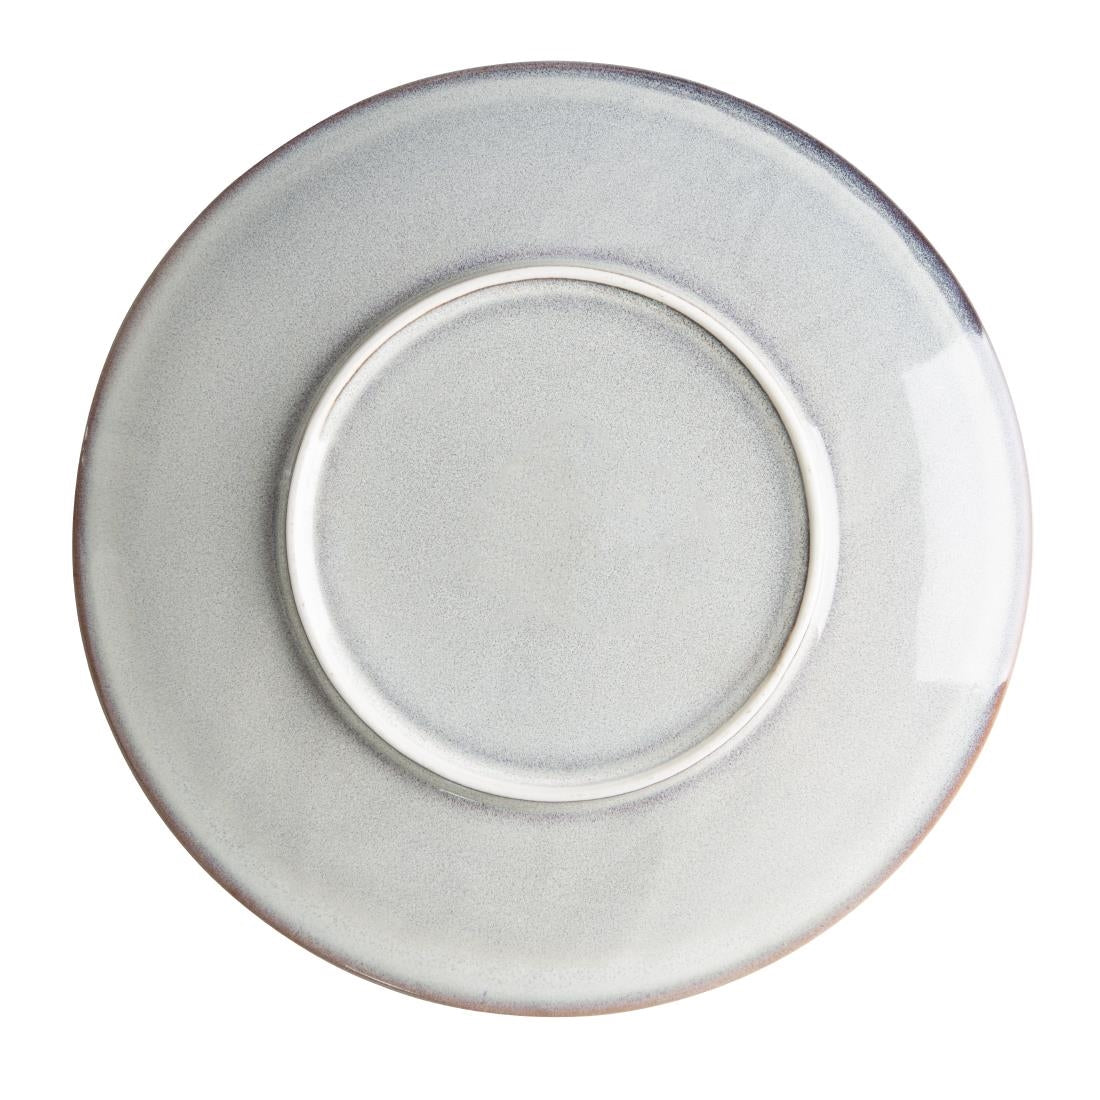 FU194 Olympia Drift Grey Embossed Coupe Plates 280mm (Pack of 4)